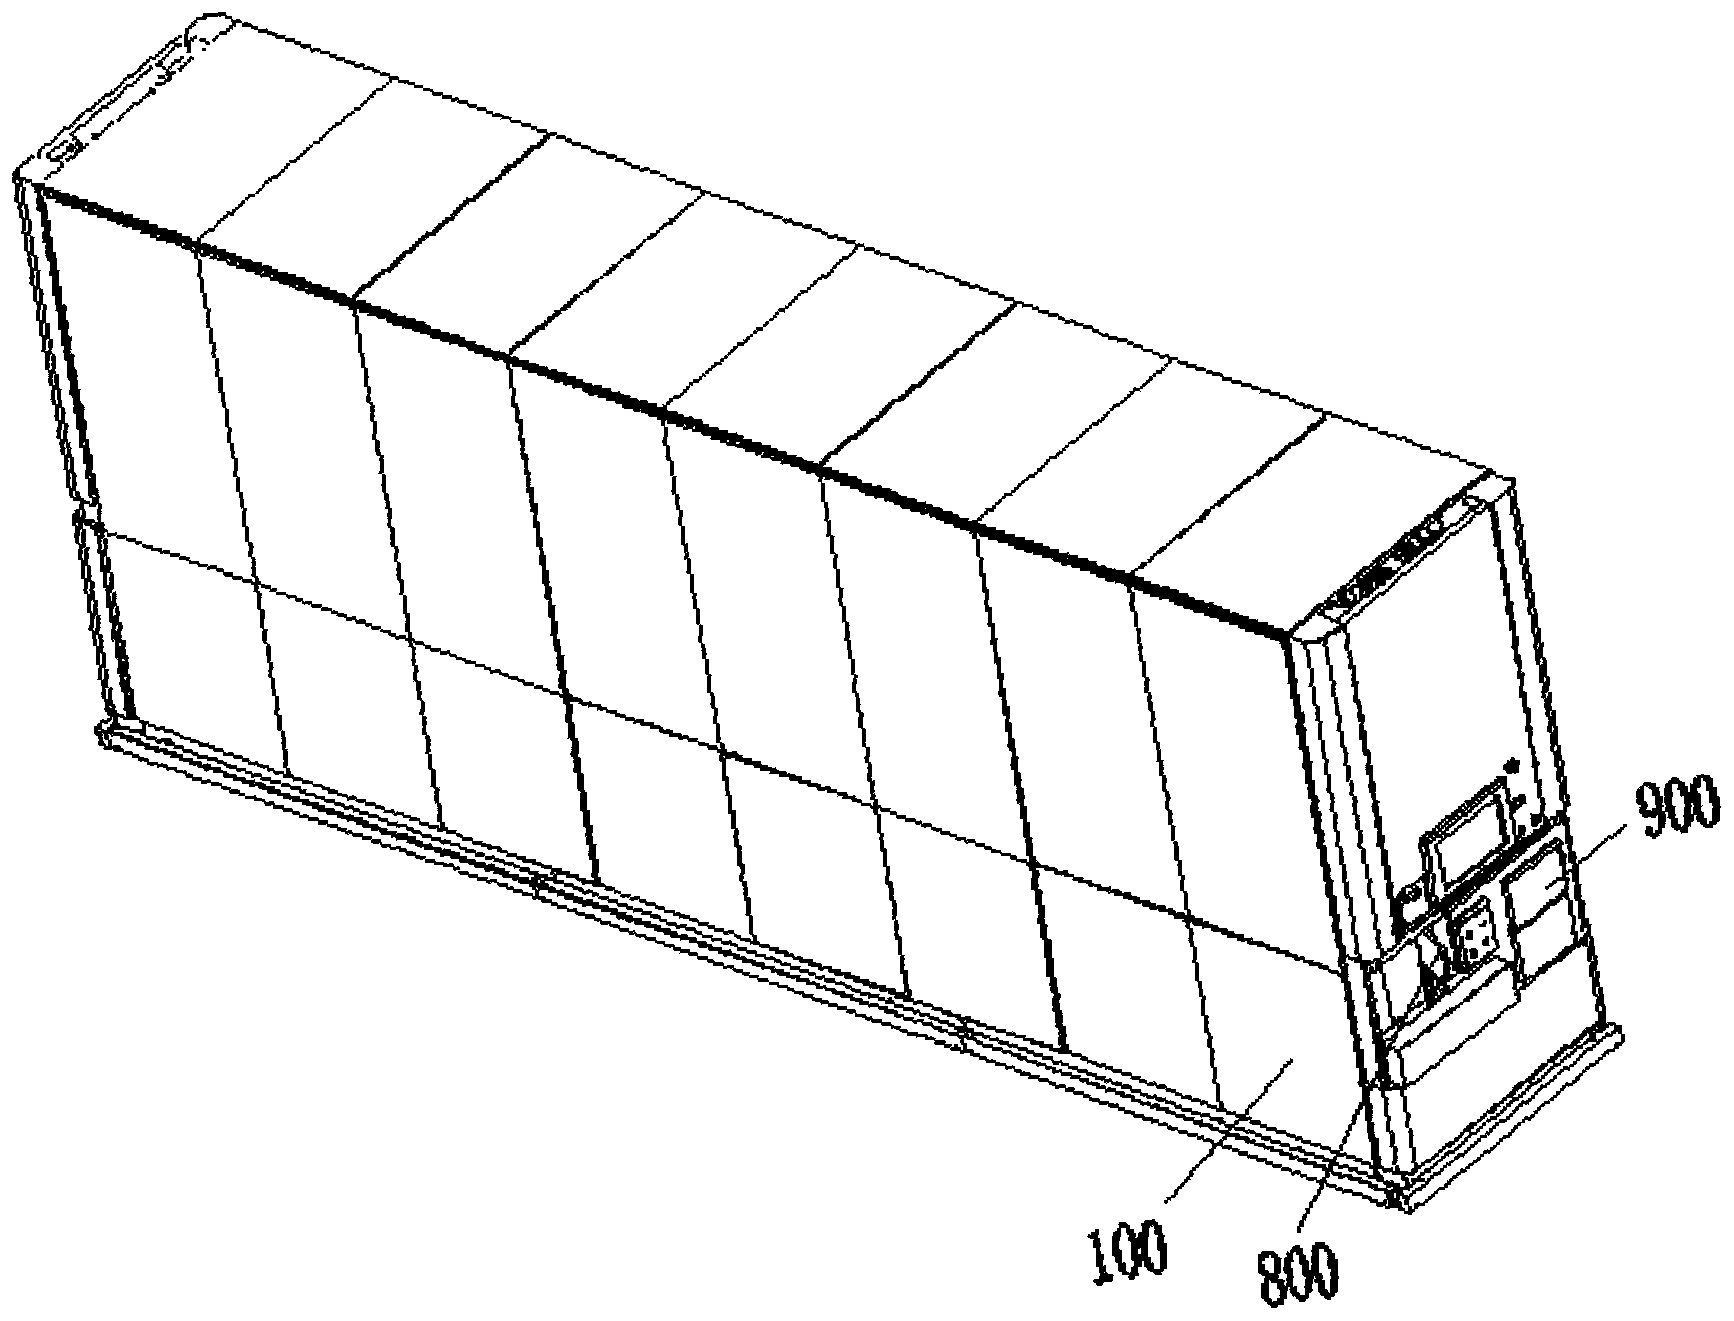 Intelligent container for automatically storing and picking up cargoes one to one